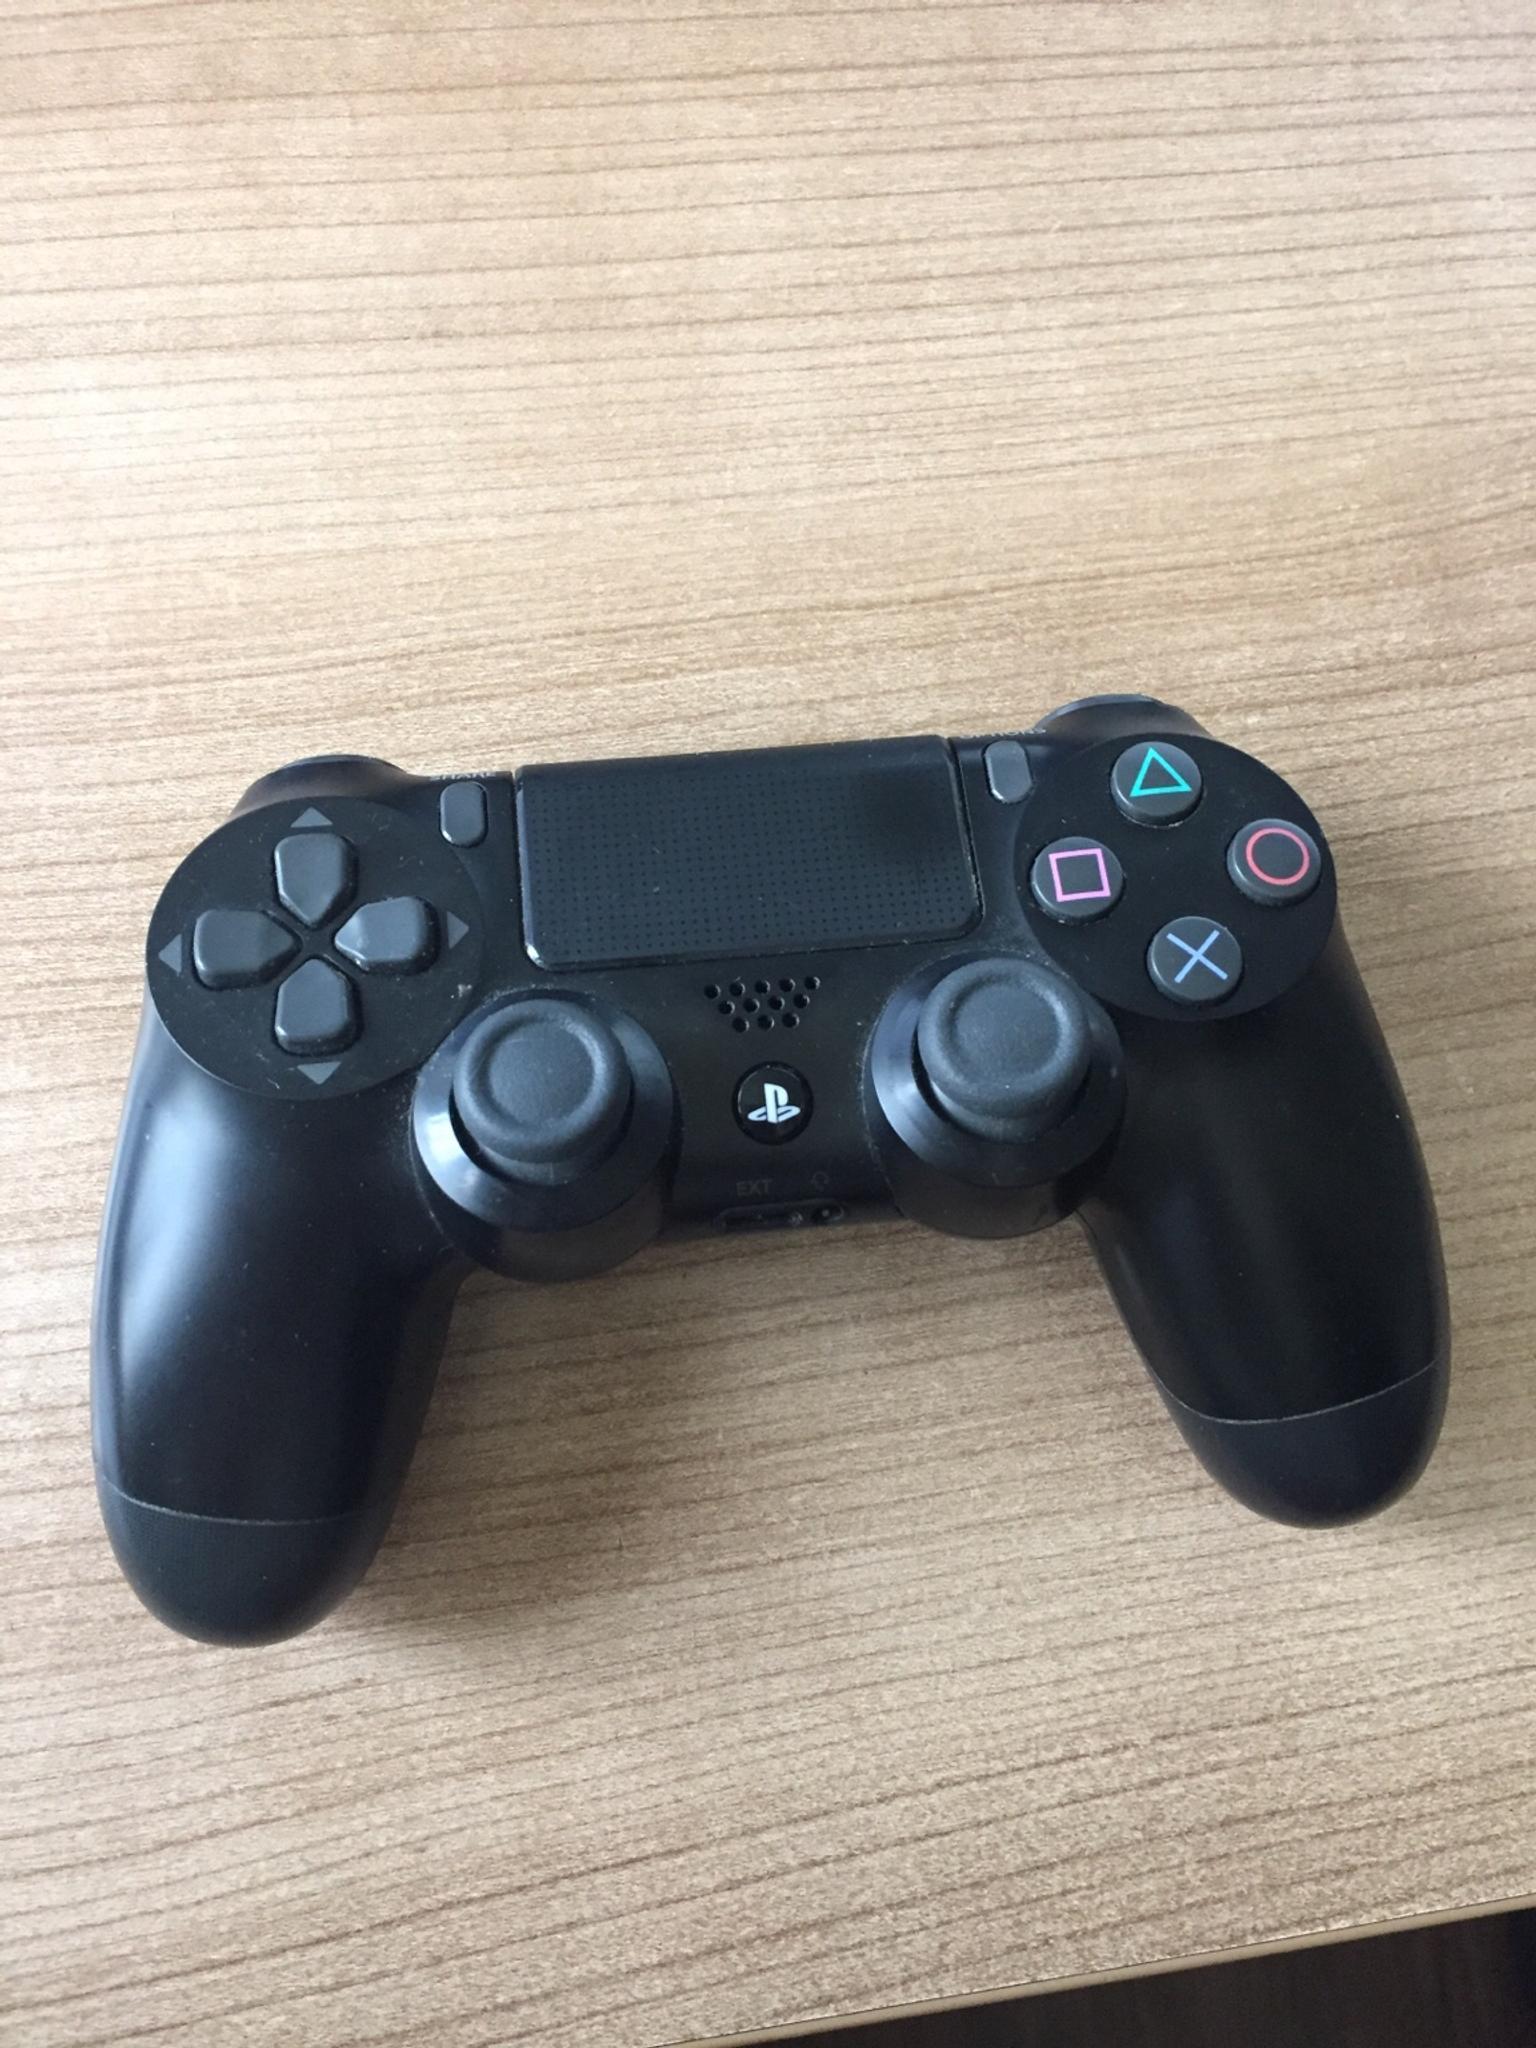 official PS4 controller in London 